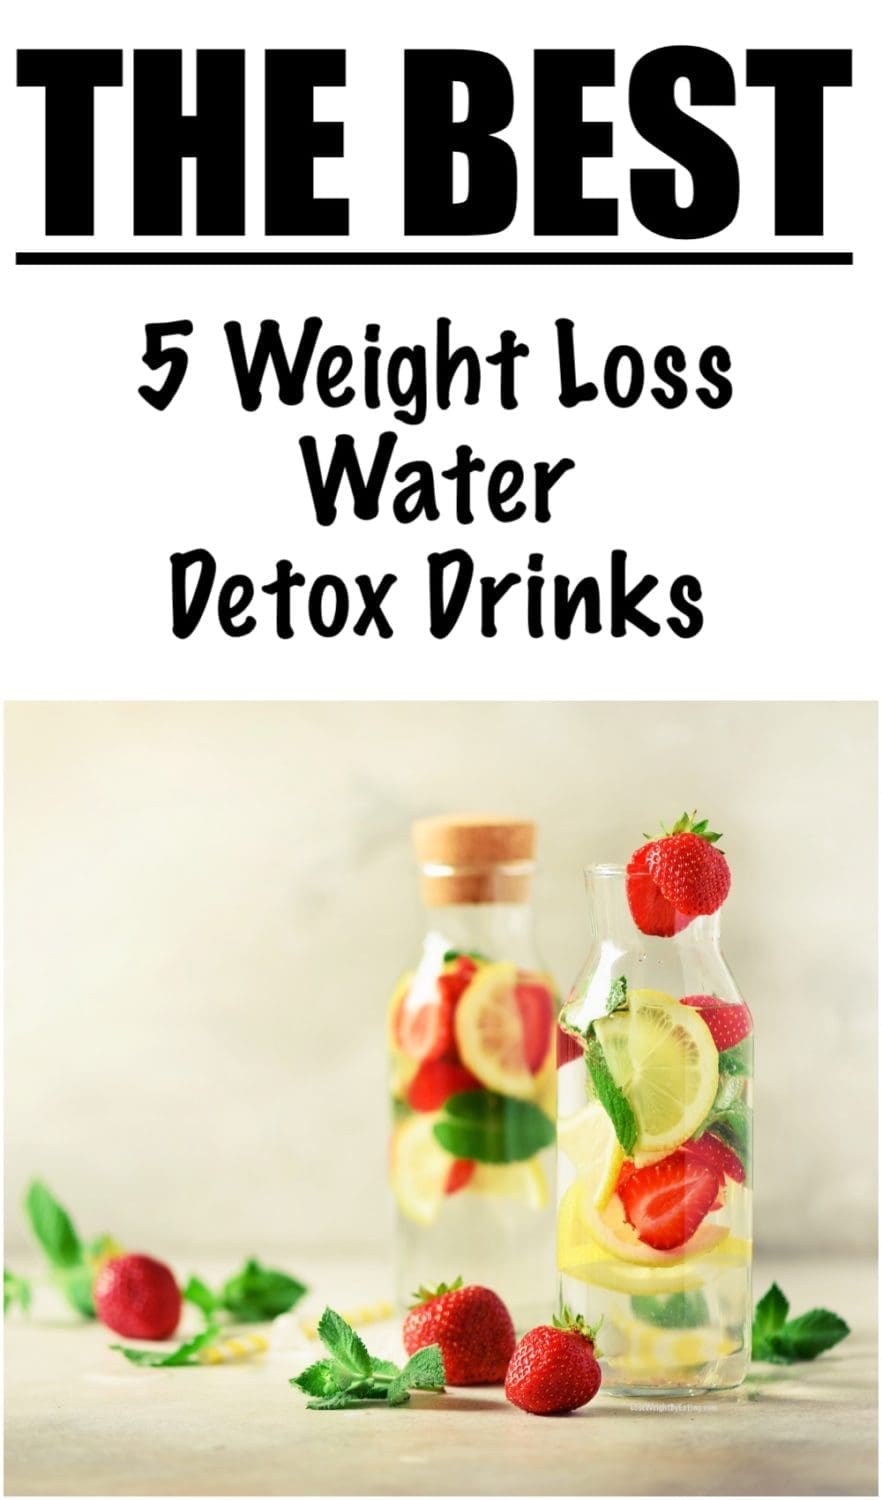 The 5 BEST Weight Loss Water Detox Drinks!